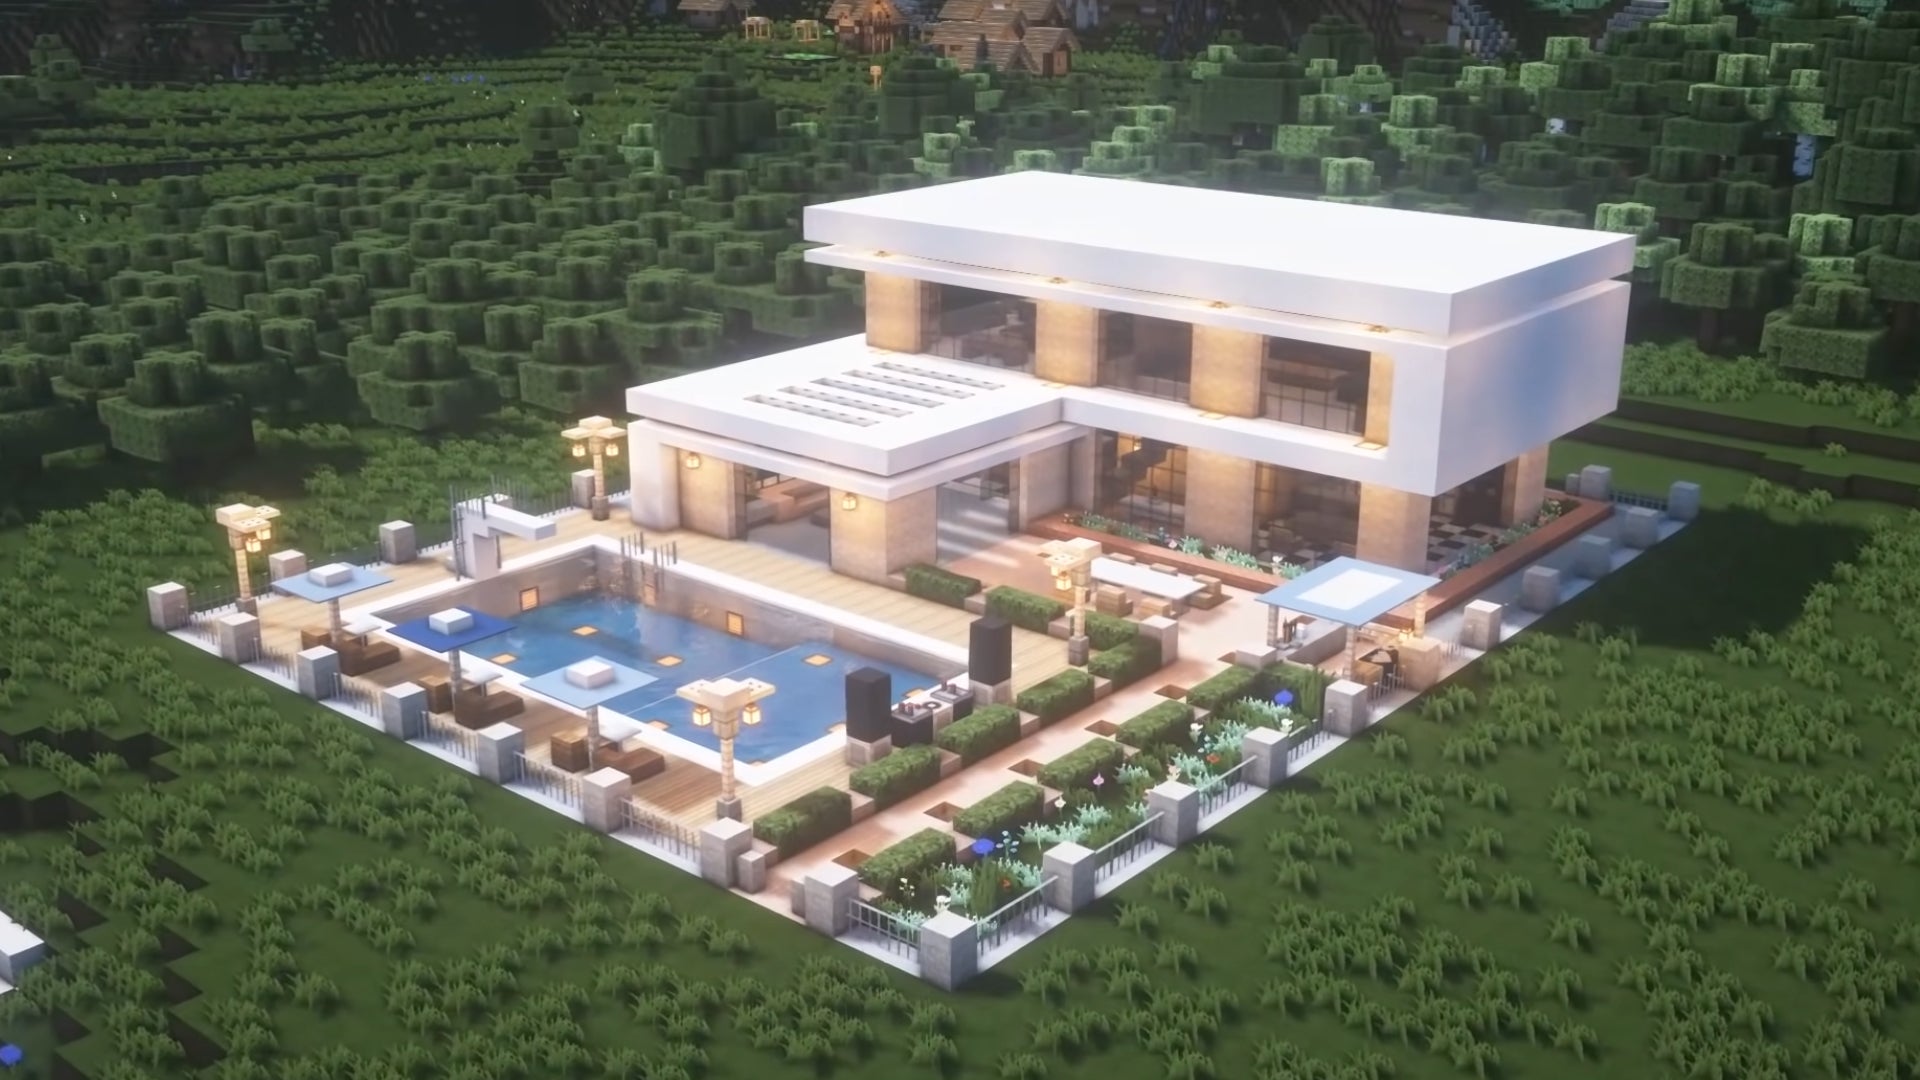 A large modern house in Minecraft, complete with pool, built by YouTuber IrieGenie.